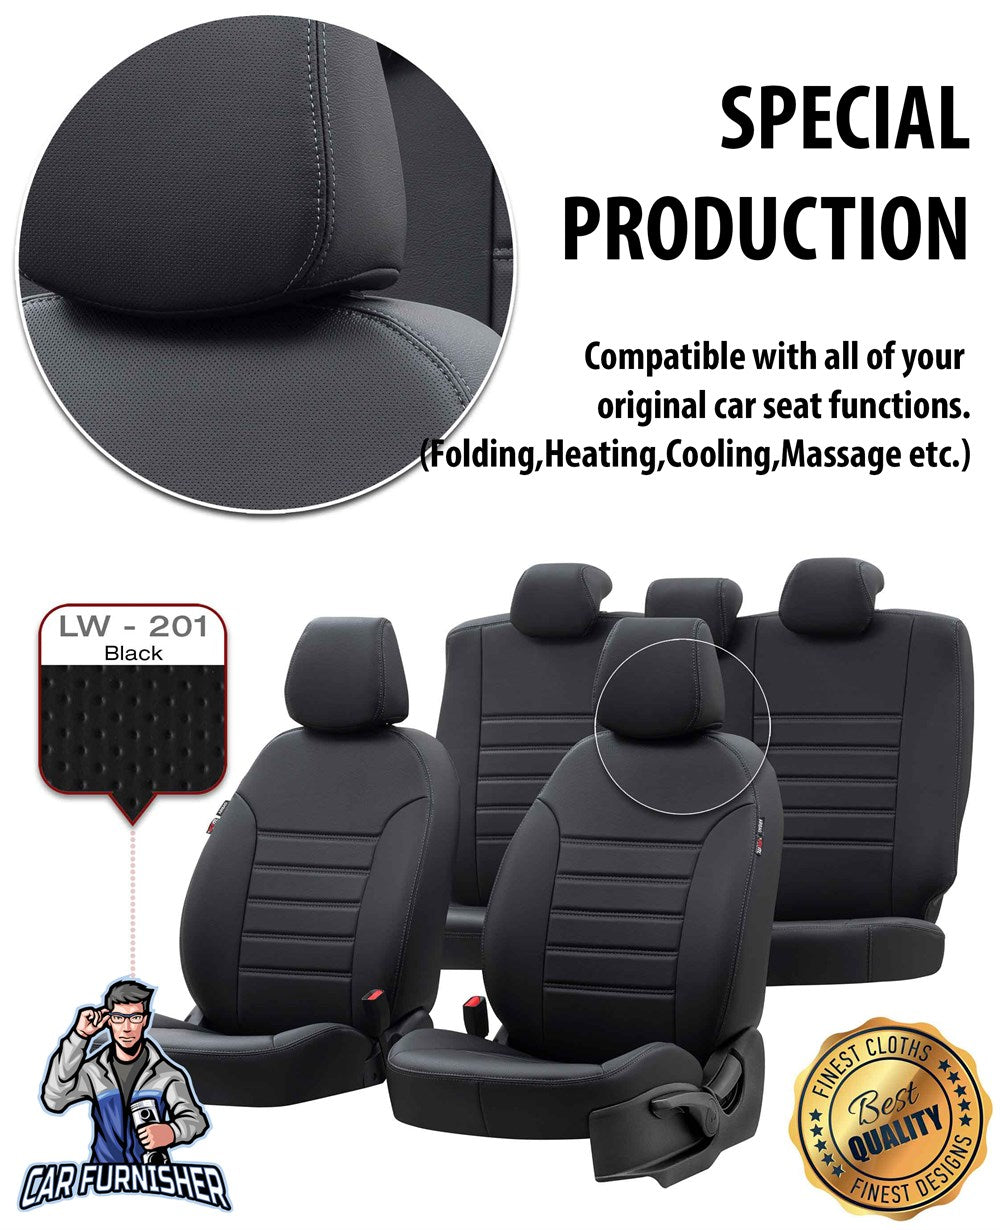 Mercedes A Class Seat Covers Istanbul Leather Design Black Leather